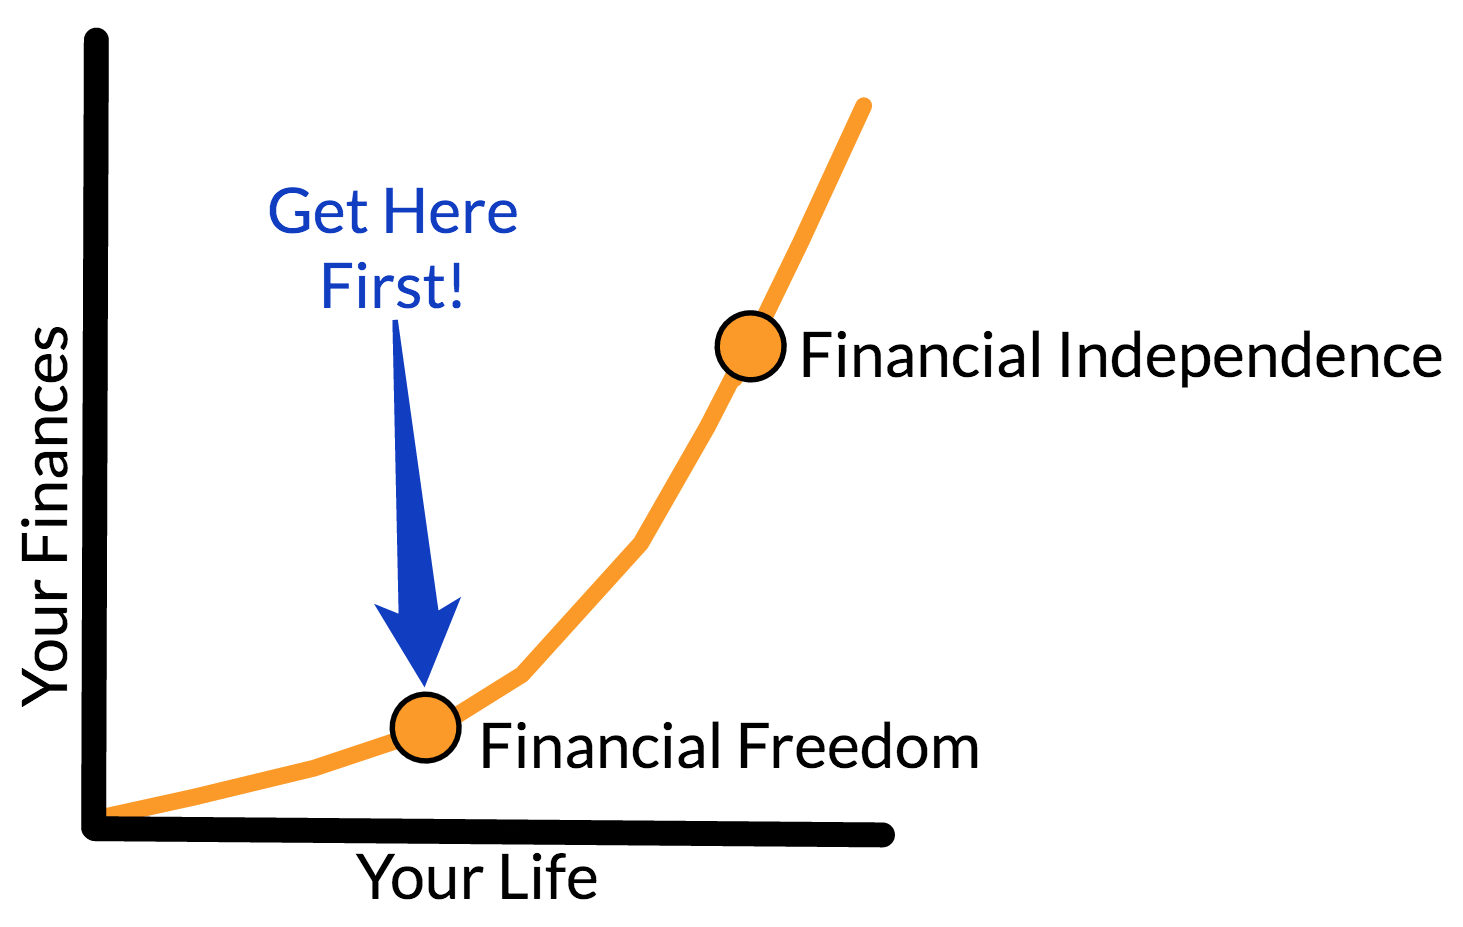 Financial Freedom and Independence chart